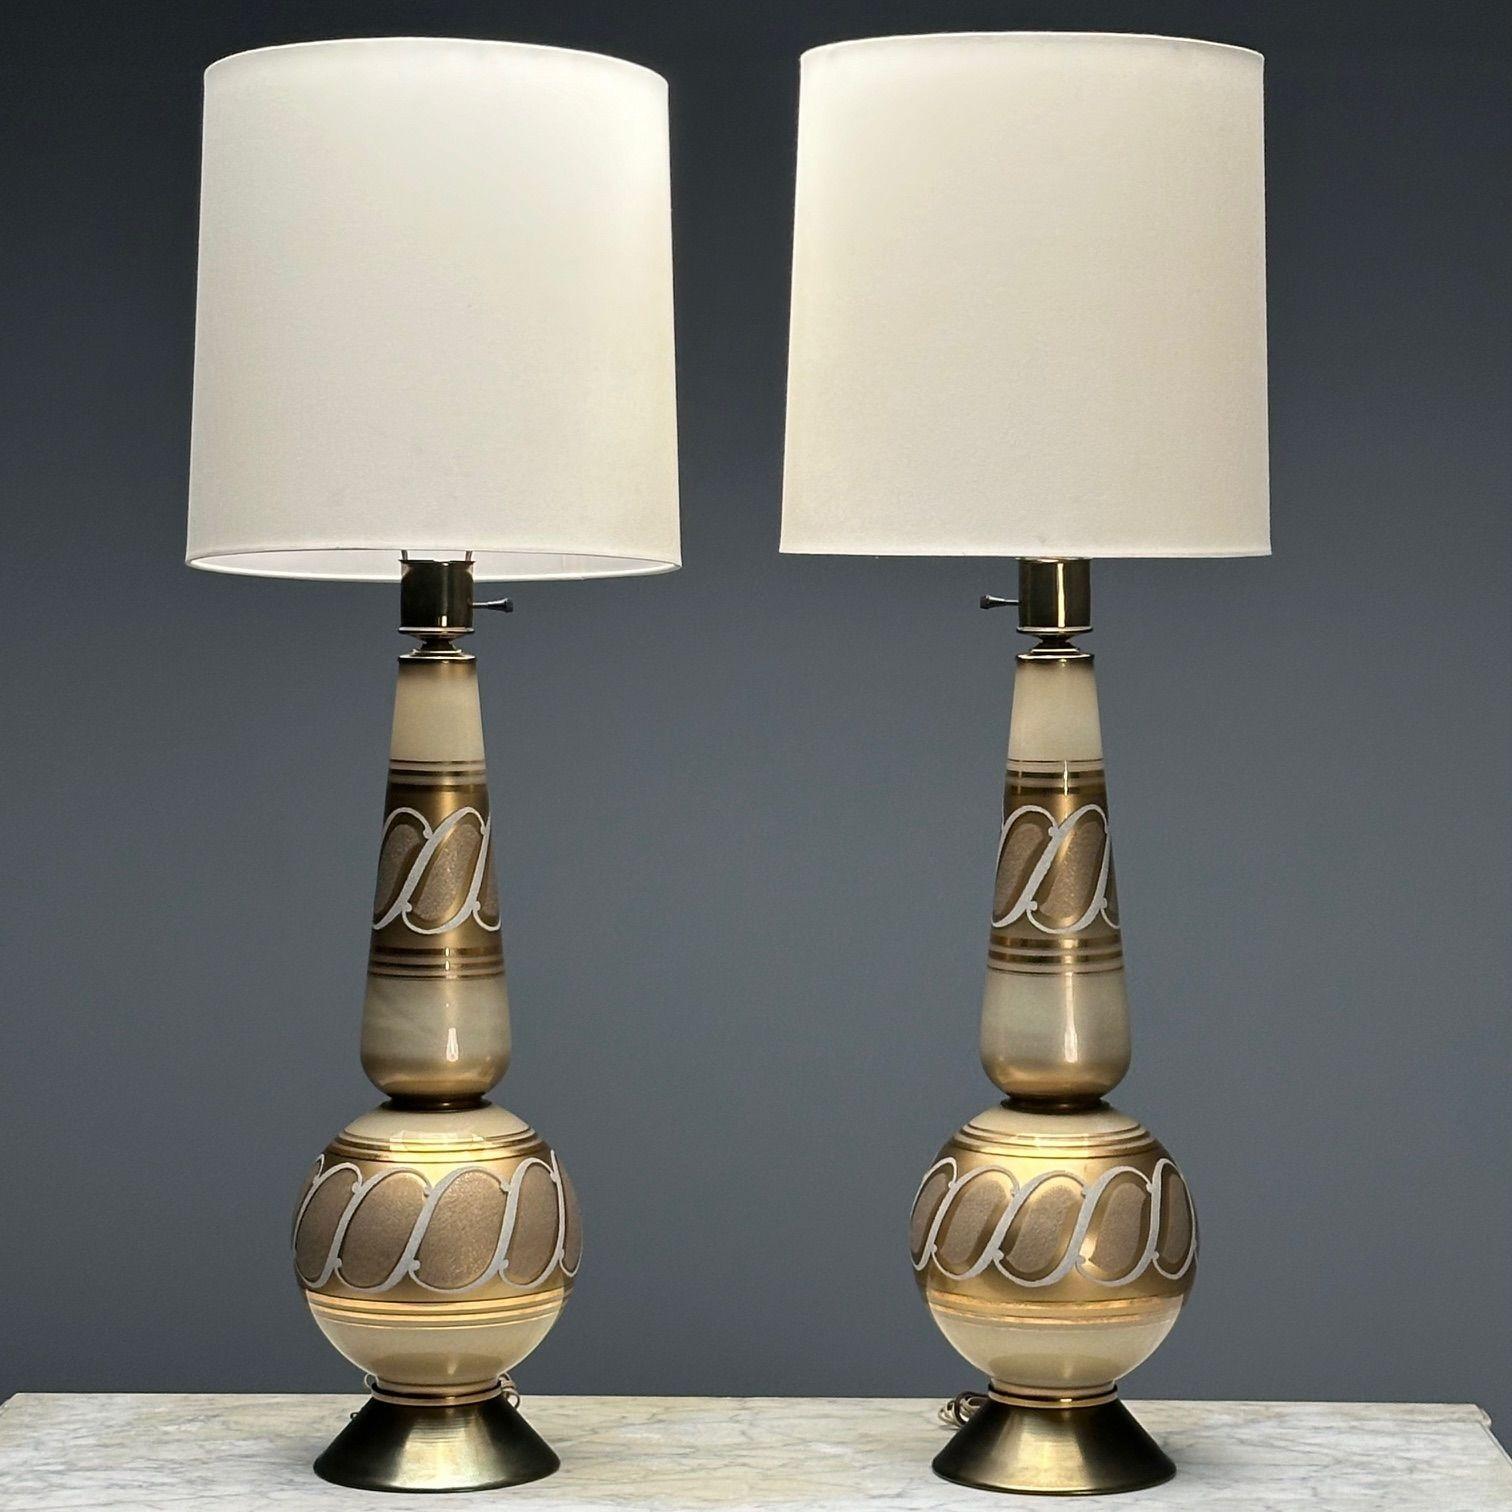 Italian Mid-Century Modern, Large Table Lamps, Gold Glass, Brass, Italy, 1960s

A pair of large glass table lamps designed and produced in Italy during the mid-century period. Having intricately decorated gilt glass and brass detailing. Shades